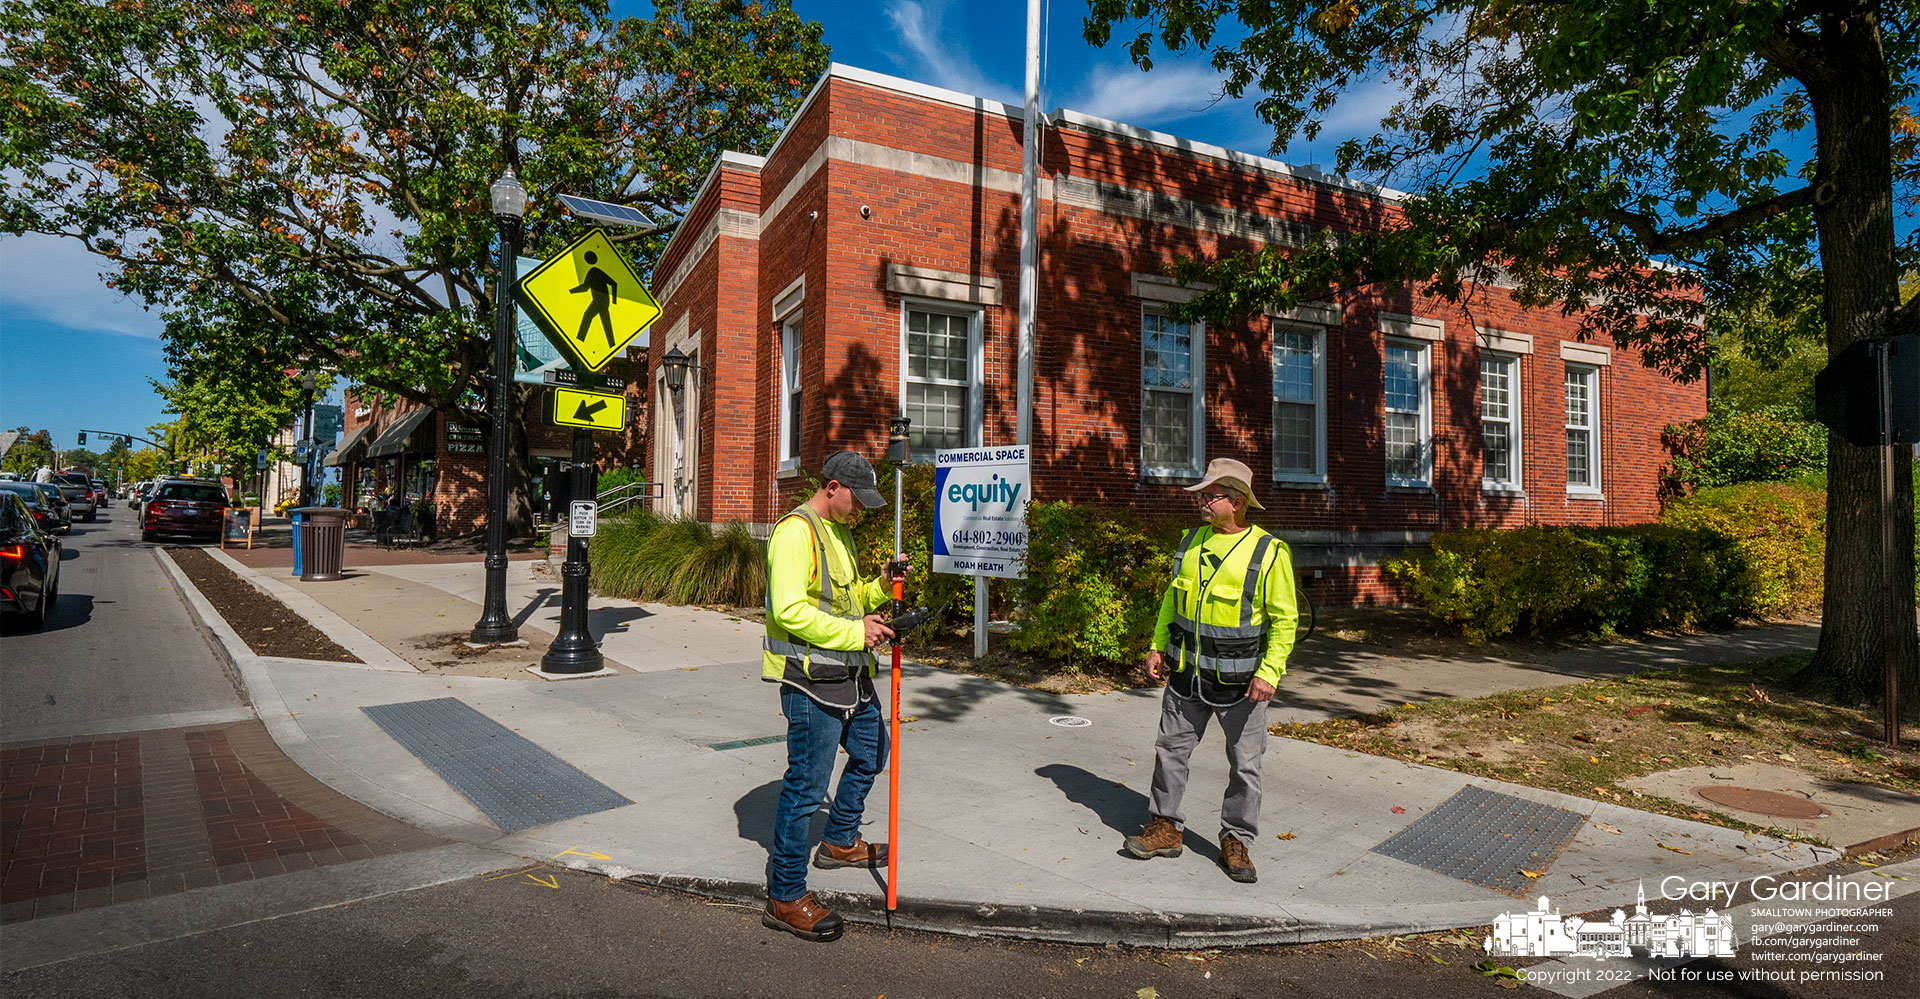 A survey crew marks locations in the Uptown Westerville block that contains the former police detective bureau in the old Post Office, Java Central, Westerville Florist, and other buildings within the alleys behind those buildings. My Final Photo for October 4, 2022.